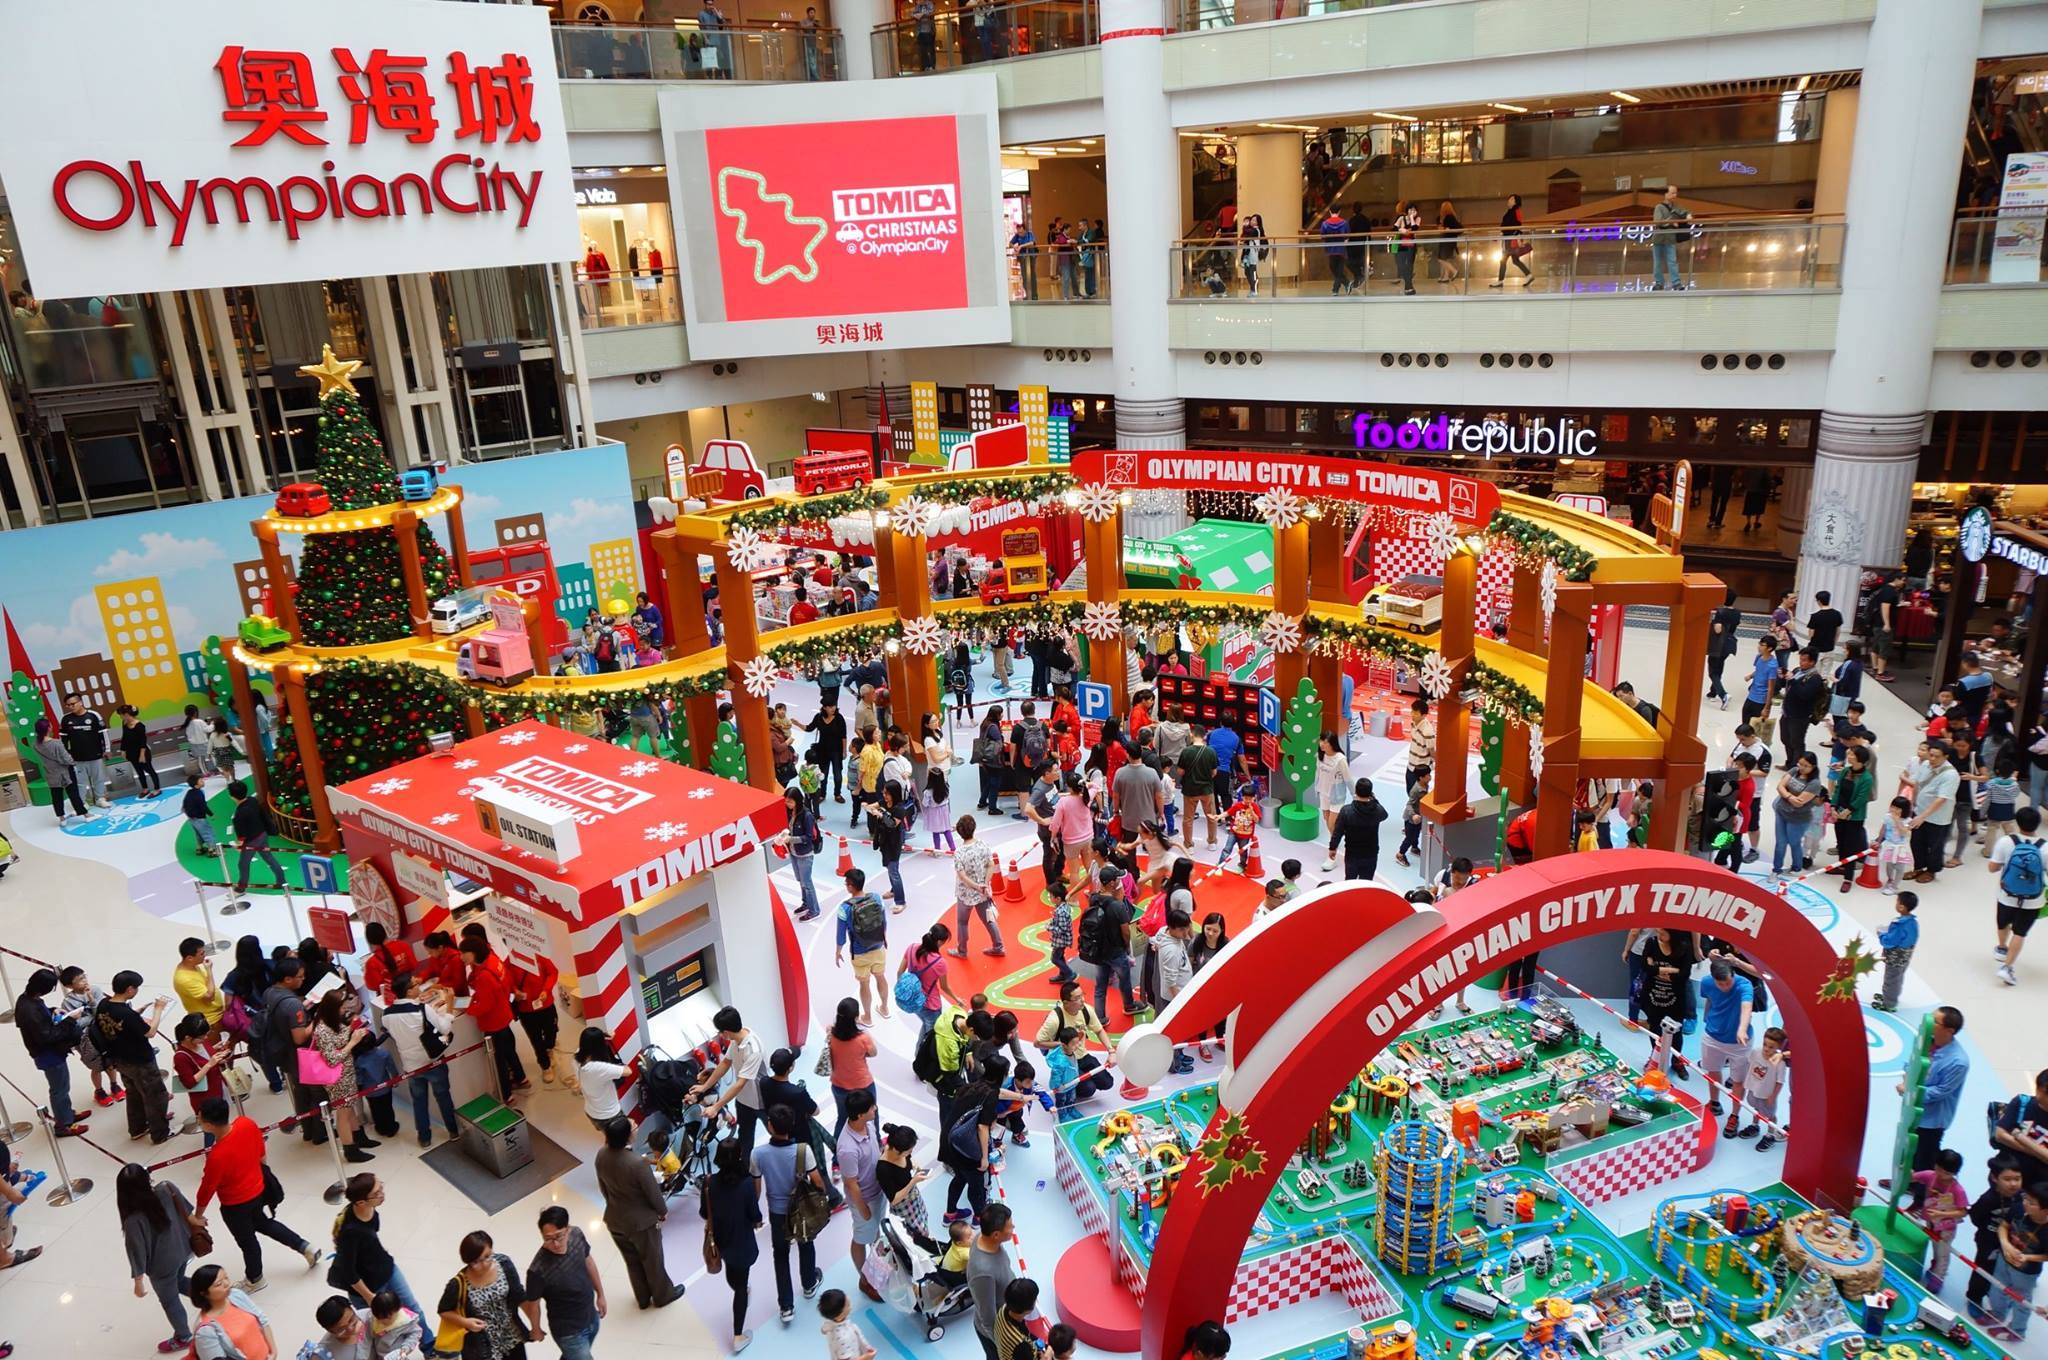 Hong Kong Shopping mall Christmas exhibitions 2015, TOMICA Christmas Paradise Hong Kong 2015,TOMICA Christmas Paradise December 2015 Hong Kong,shopping mall in Hong Kong 2015,2015 Christmas shopping recommend,Shopping party in Hong Kong 2015,Hong Kong shopping street 2015,Hong Kong shopping malls,Hong Kong shopping price 2015,Hong Kong shopping festival 2015,Hong Kong shopping cheap 2015,Hong Kong Shopping mall Christmas exhibitions 2015,Xmas shopping trip 2015,Xmas shopping 2015 Hong Kong,Xmas shopping online 2015,Xmas shopping ideas 2015,Xmas shopping list 2015,Xmas shopping games 2015,Xmas shopping bag 2015,Xmas shopping Hong Kong 2015,Xmas shopping UK 2015,Xmas shopping london 2015,TOMICA Christmas Paradise,TOMICA unique design alloy car,TOMICA with Olympian City Christmas Hong Kong 2015,TOMICA with Island Resort Mall Christmas Hong Kong 2015,